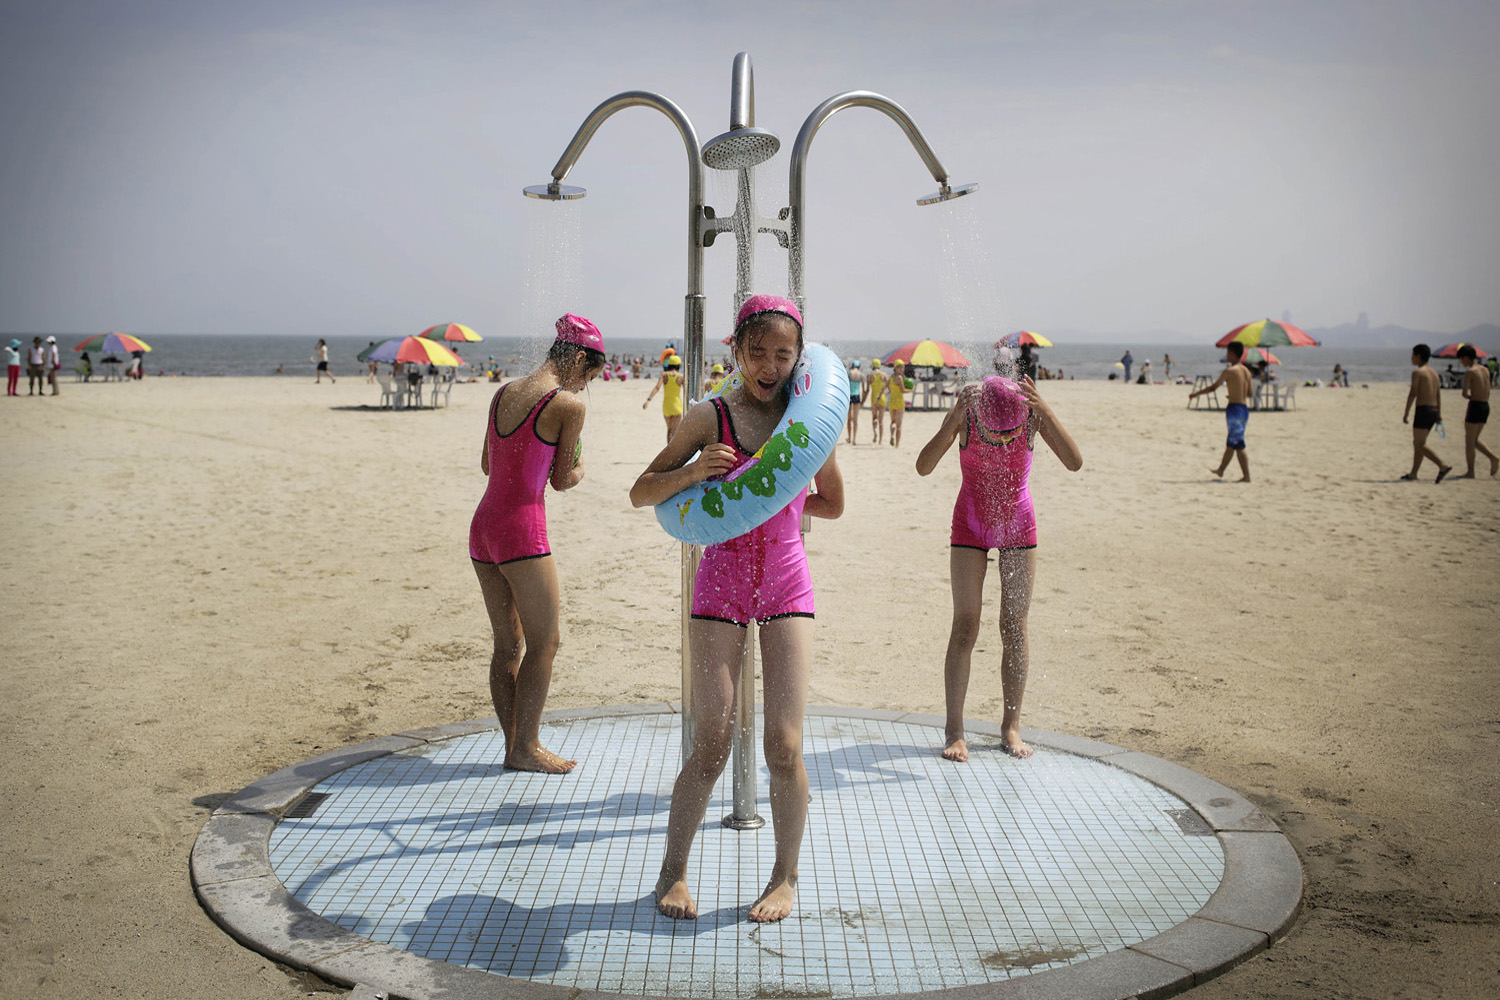 Girls in similar bathing suits stand under a shower at the Songdowon International Children's Camp in Wonsan, Jul. 29, 2014.